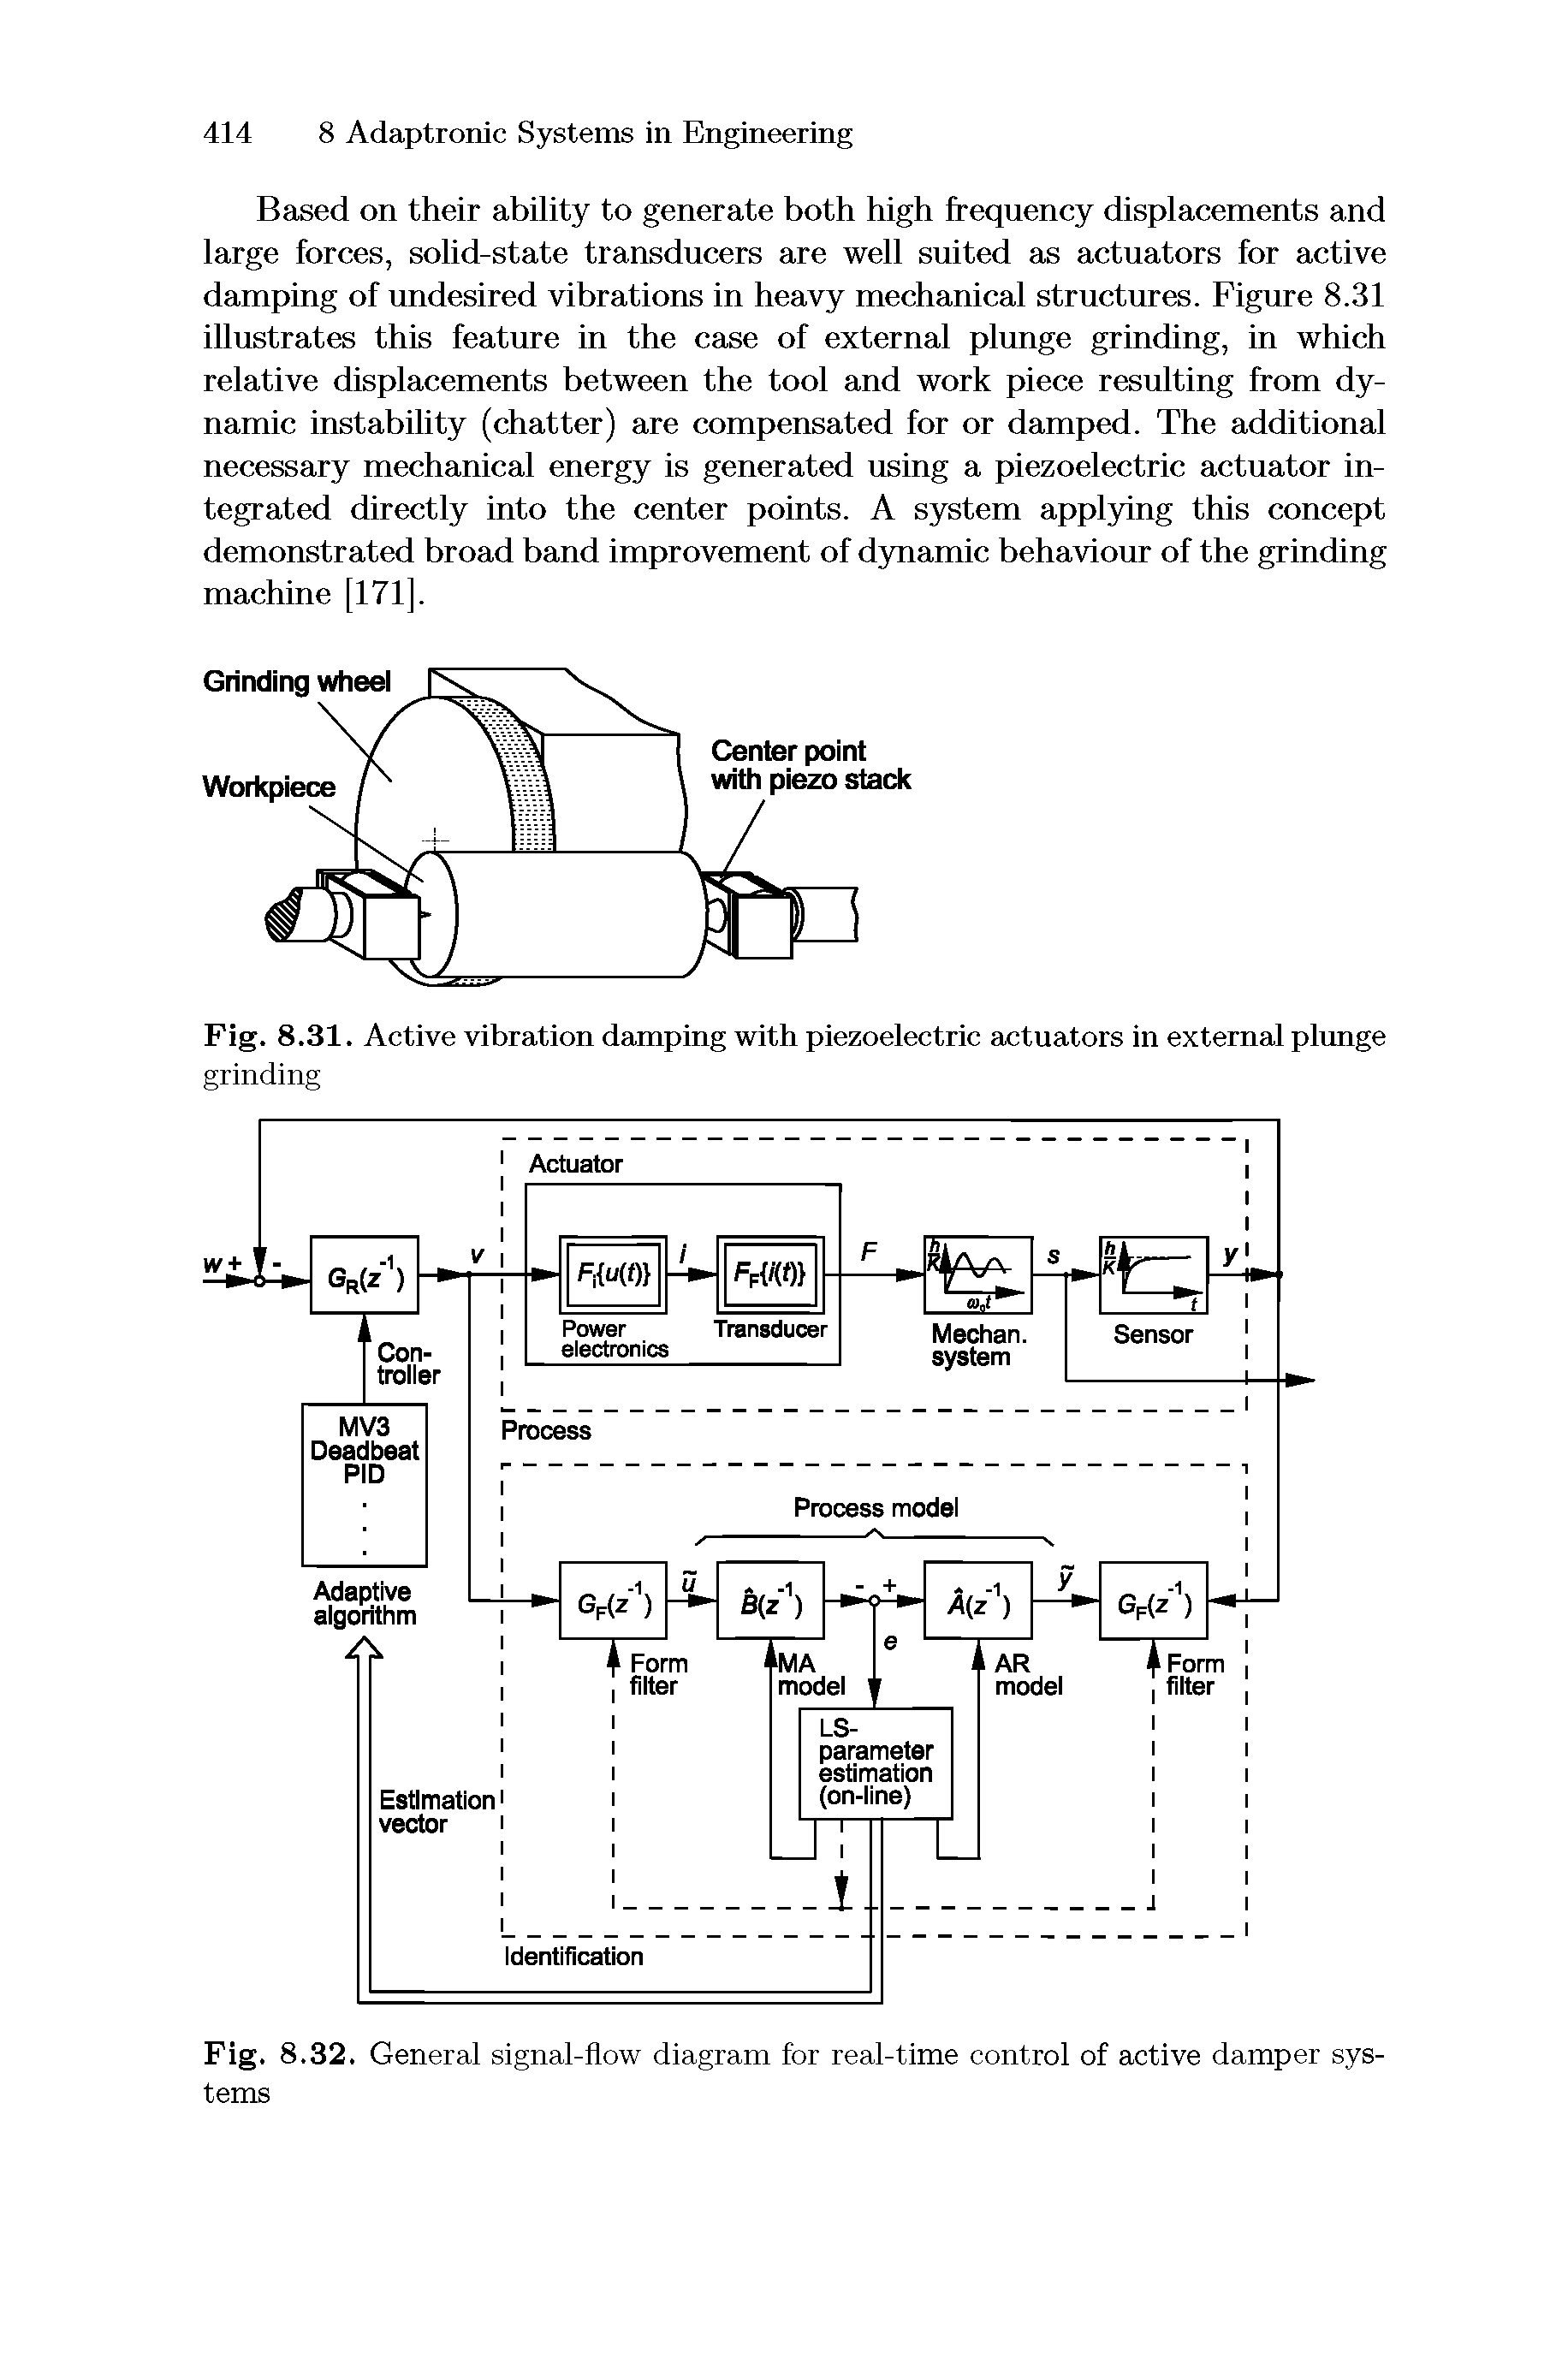 Fig. 8.32. General signal-flow diagram for real-time control of active damper systems...